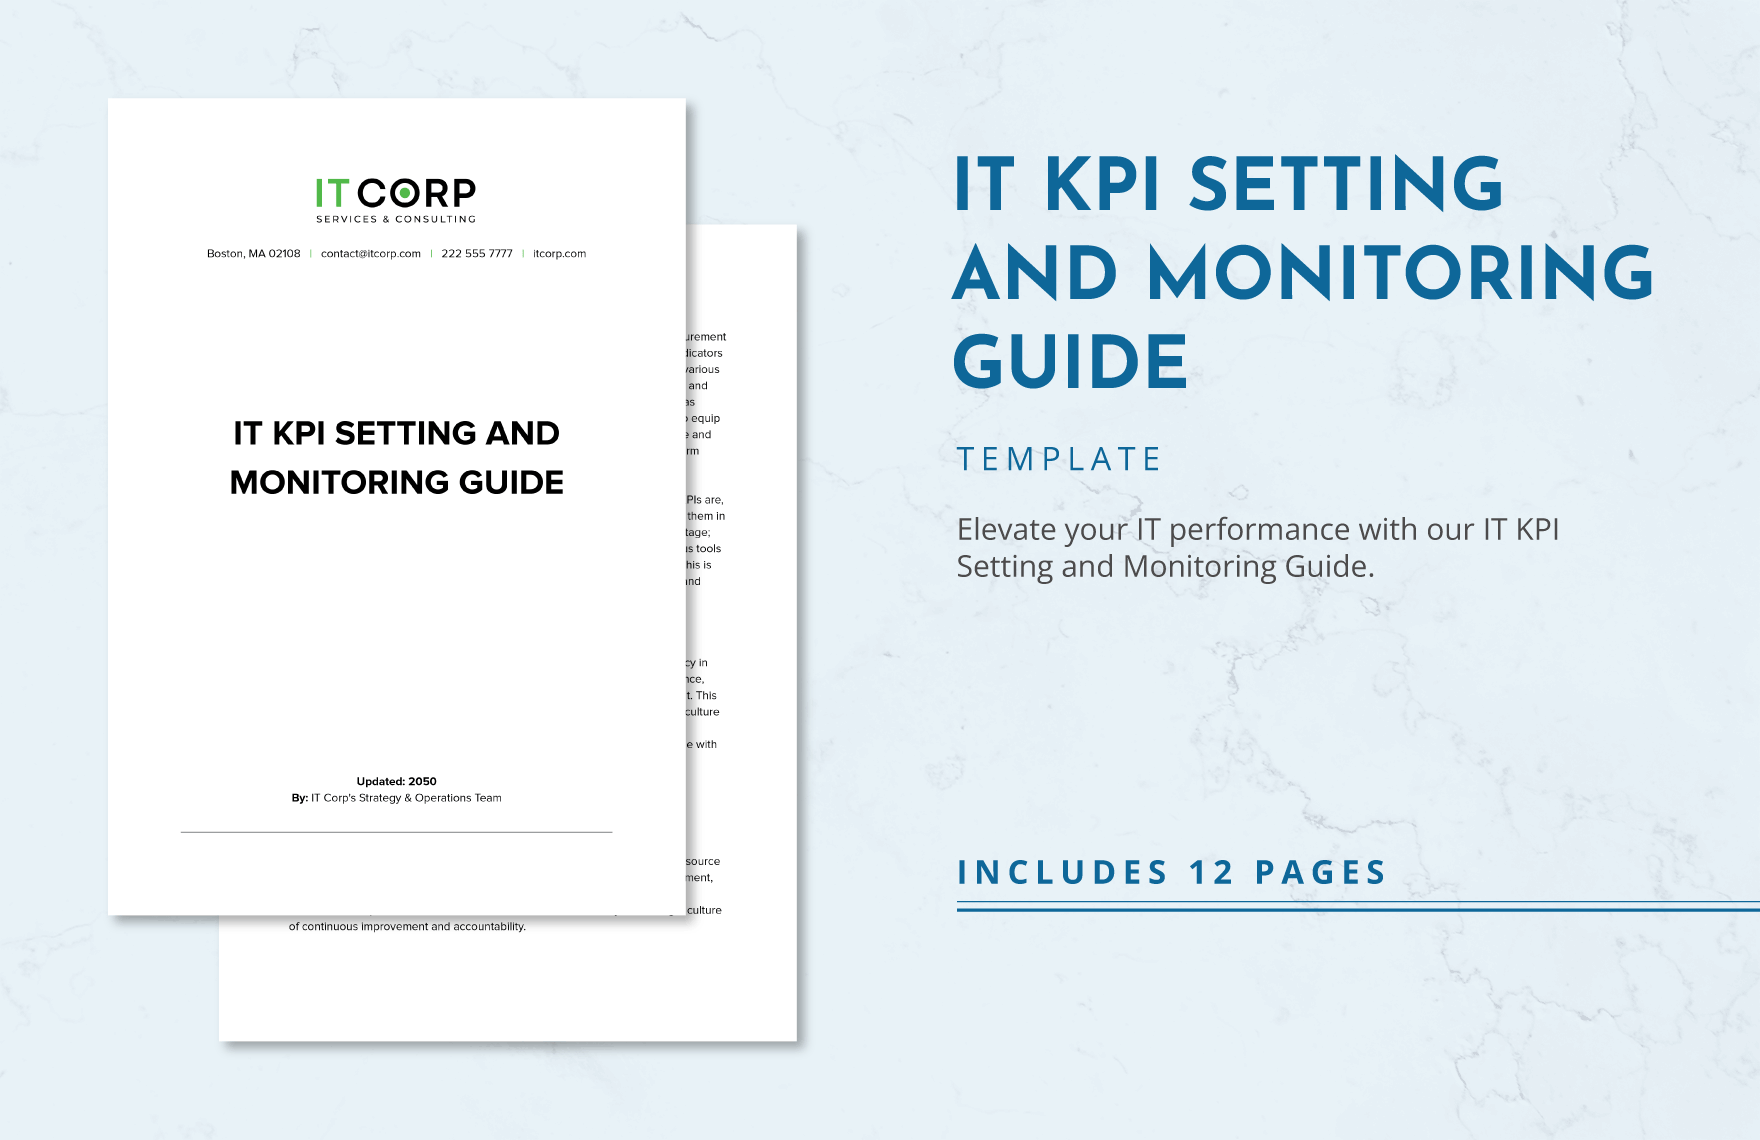 IT KPI Setting and Monitoring Guide Template in Word, Google Docs, PDF